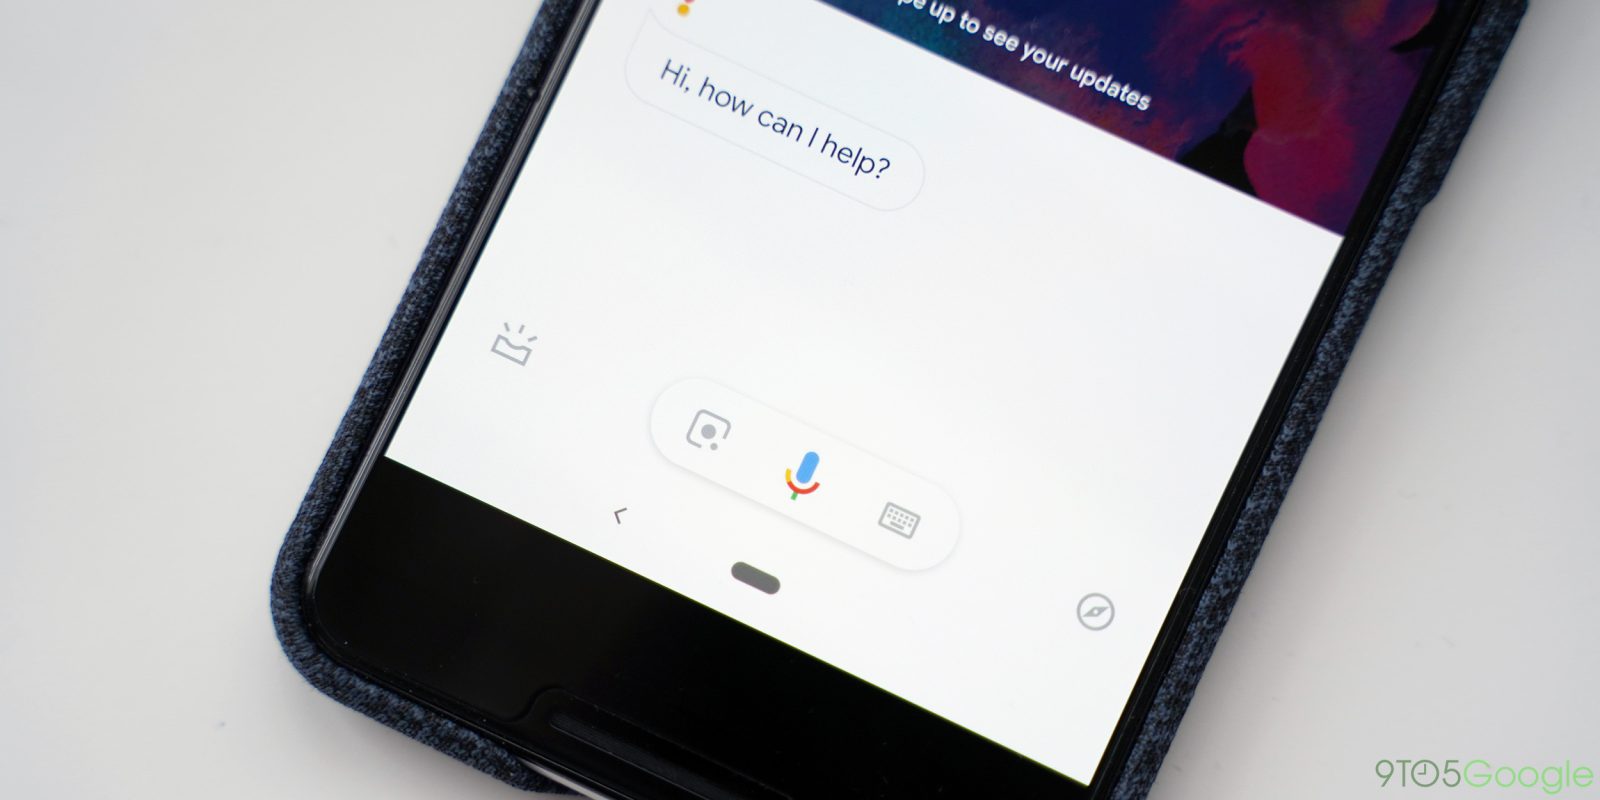 Google Assistant compact redesign